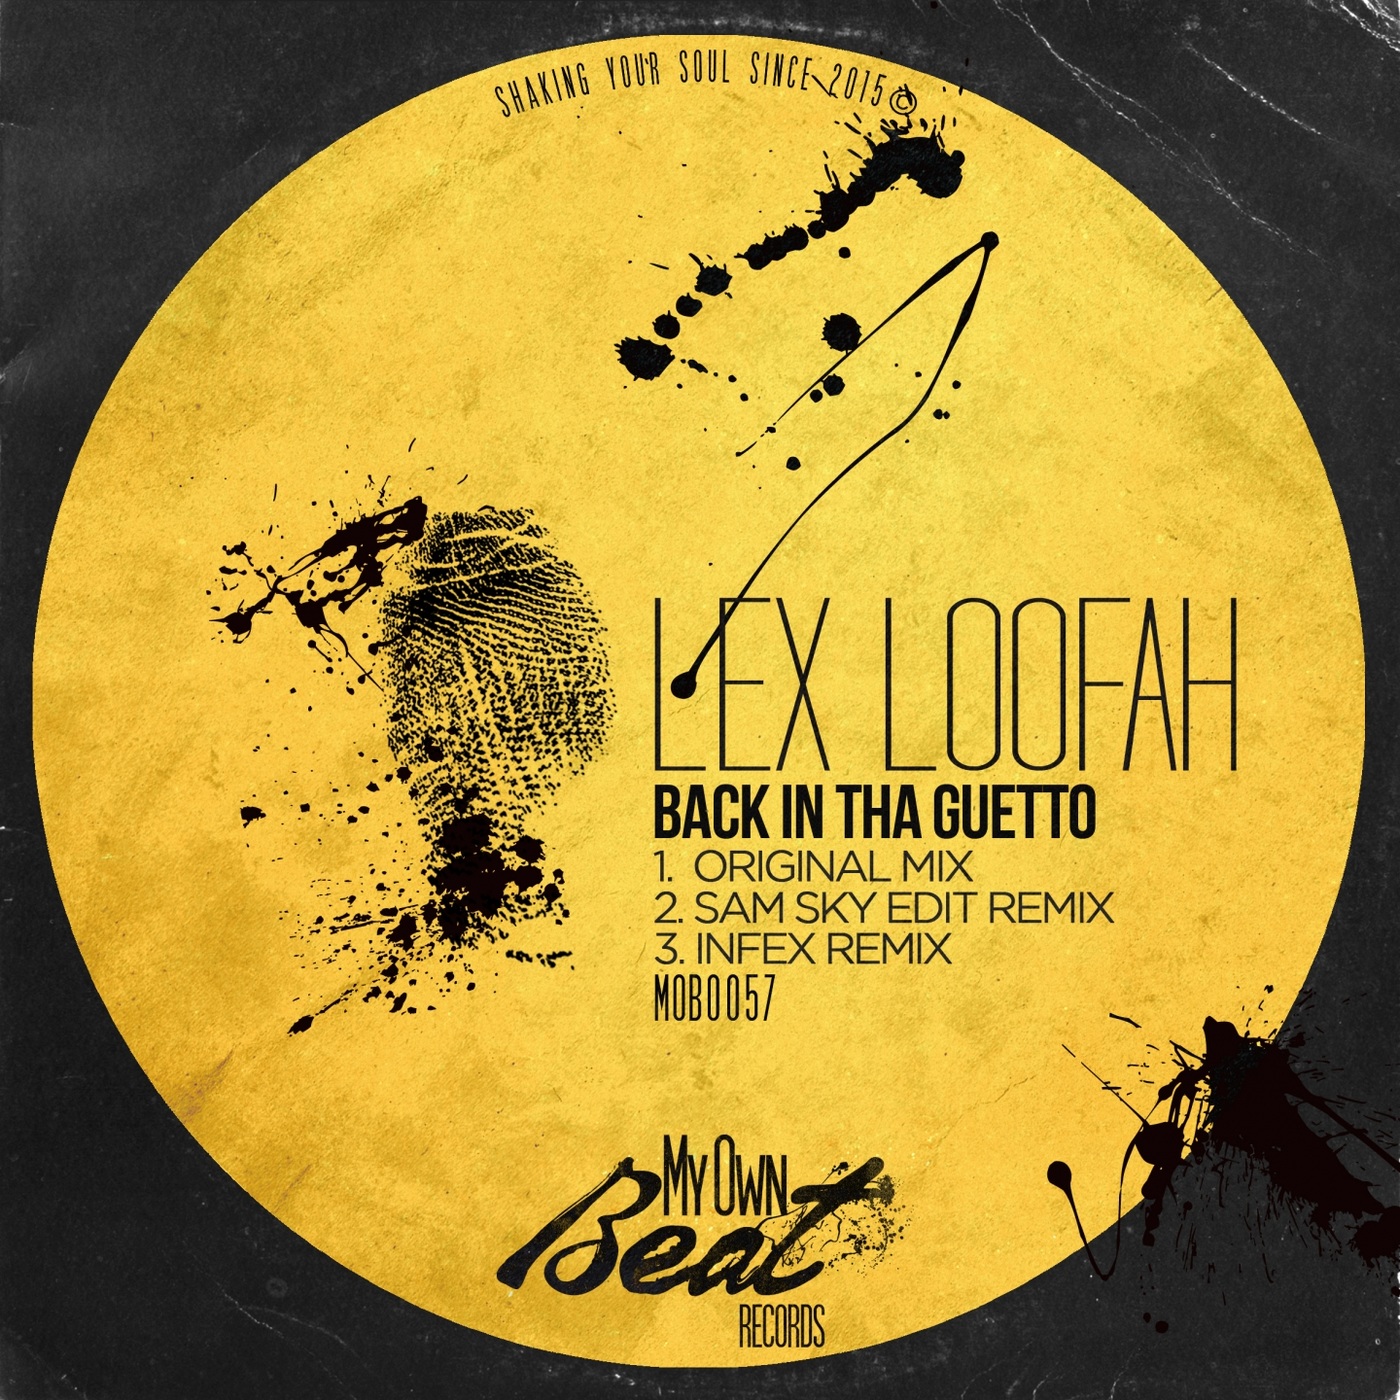 Lex Loofah - Back in Tha Guetto / My Own Beat Records